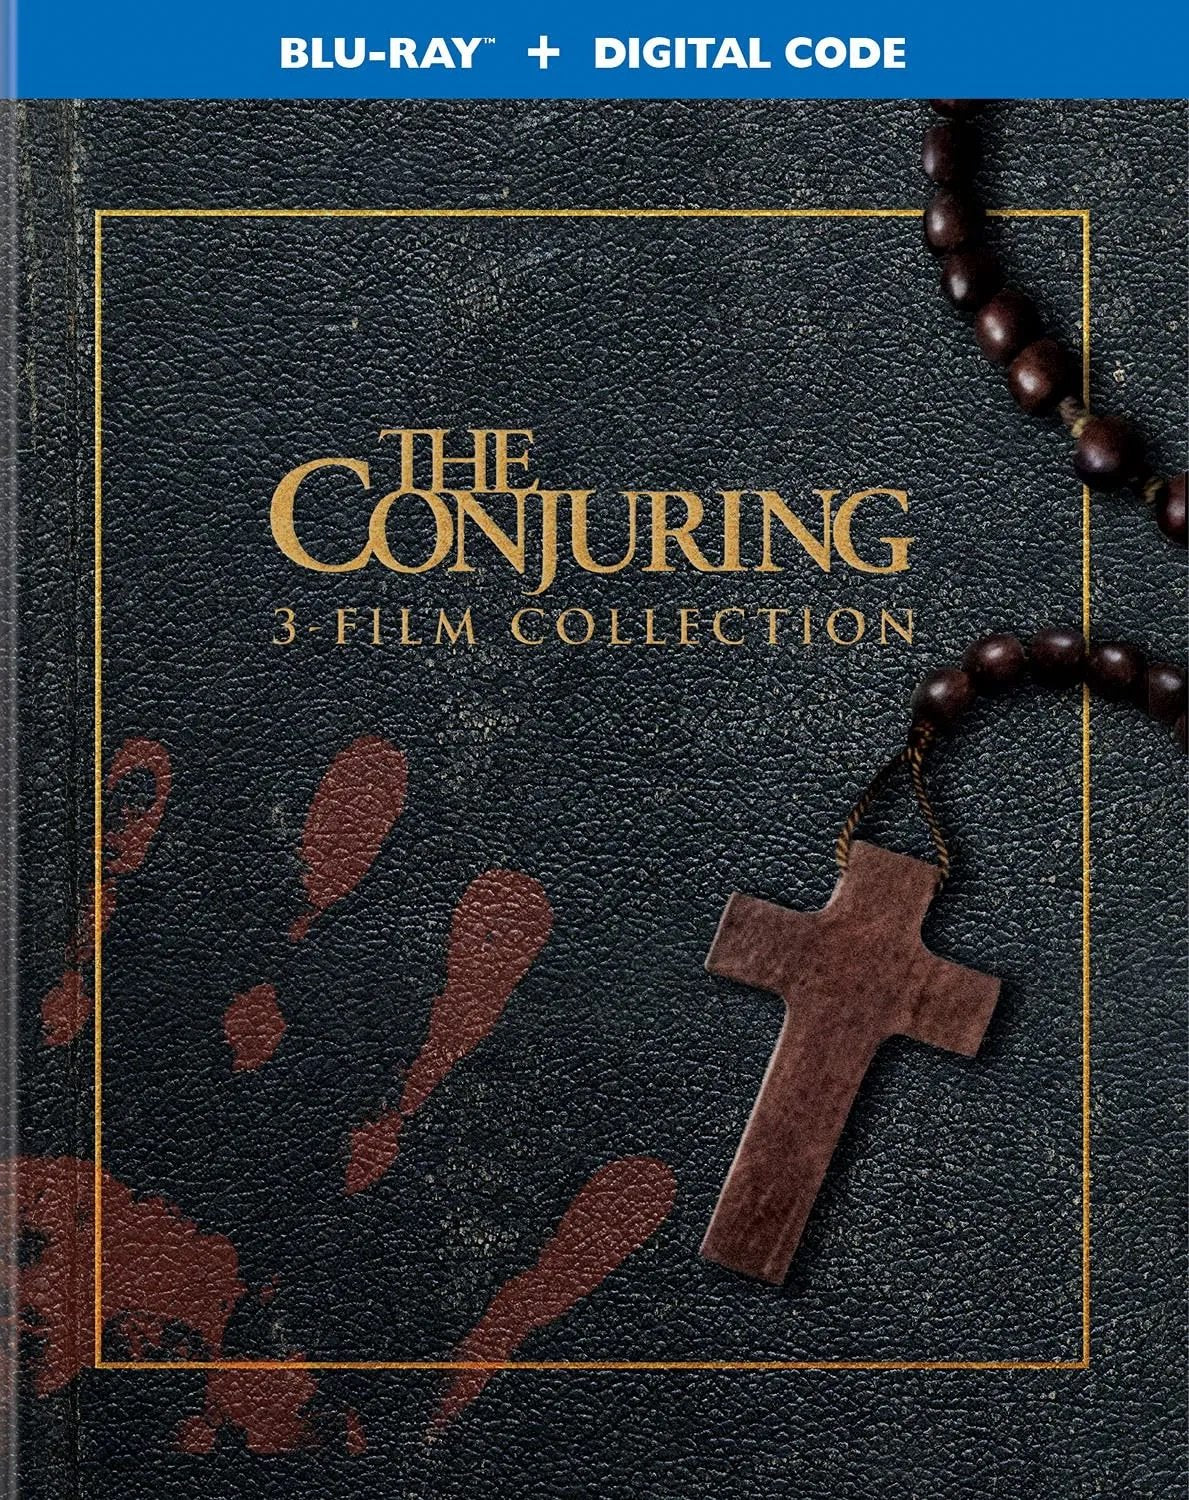 The Conjuring: 3-Film Collection (2013-2021) Vudu or Movies Anywhere HD code